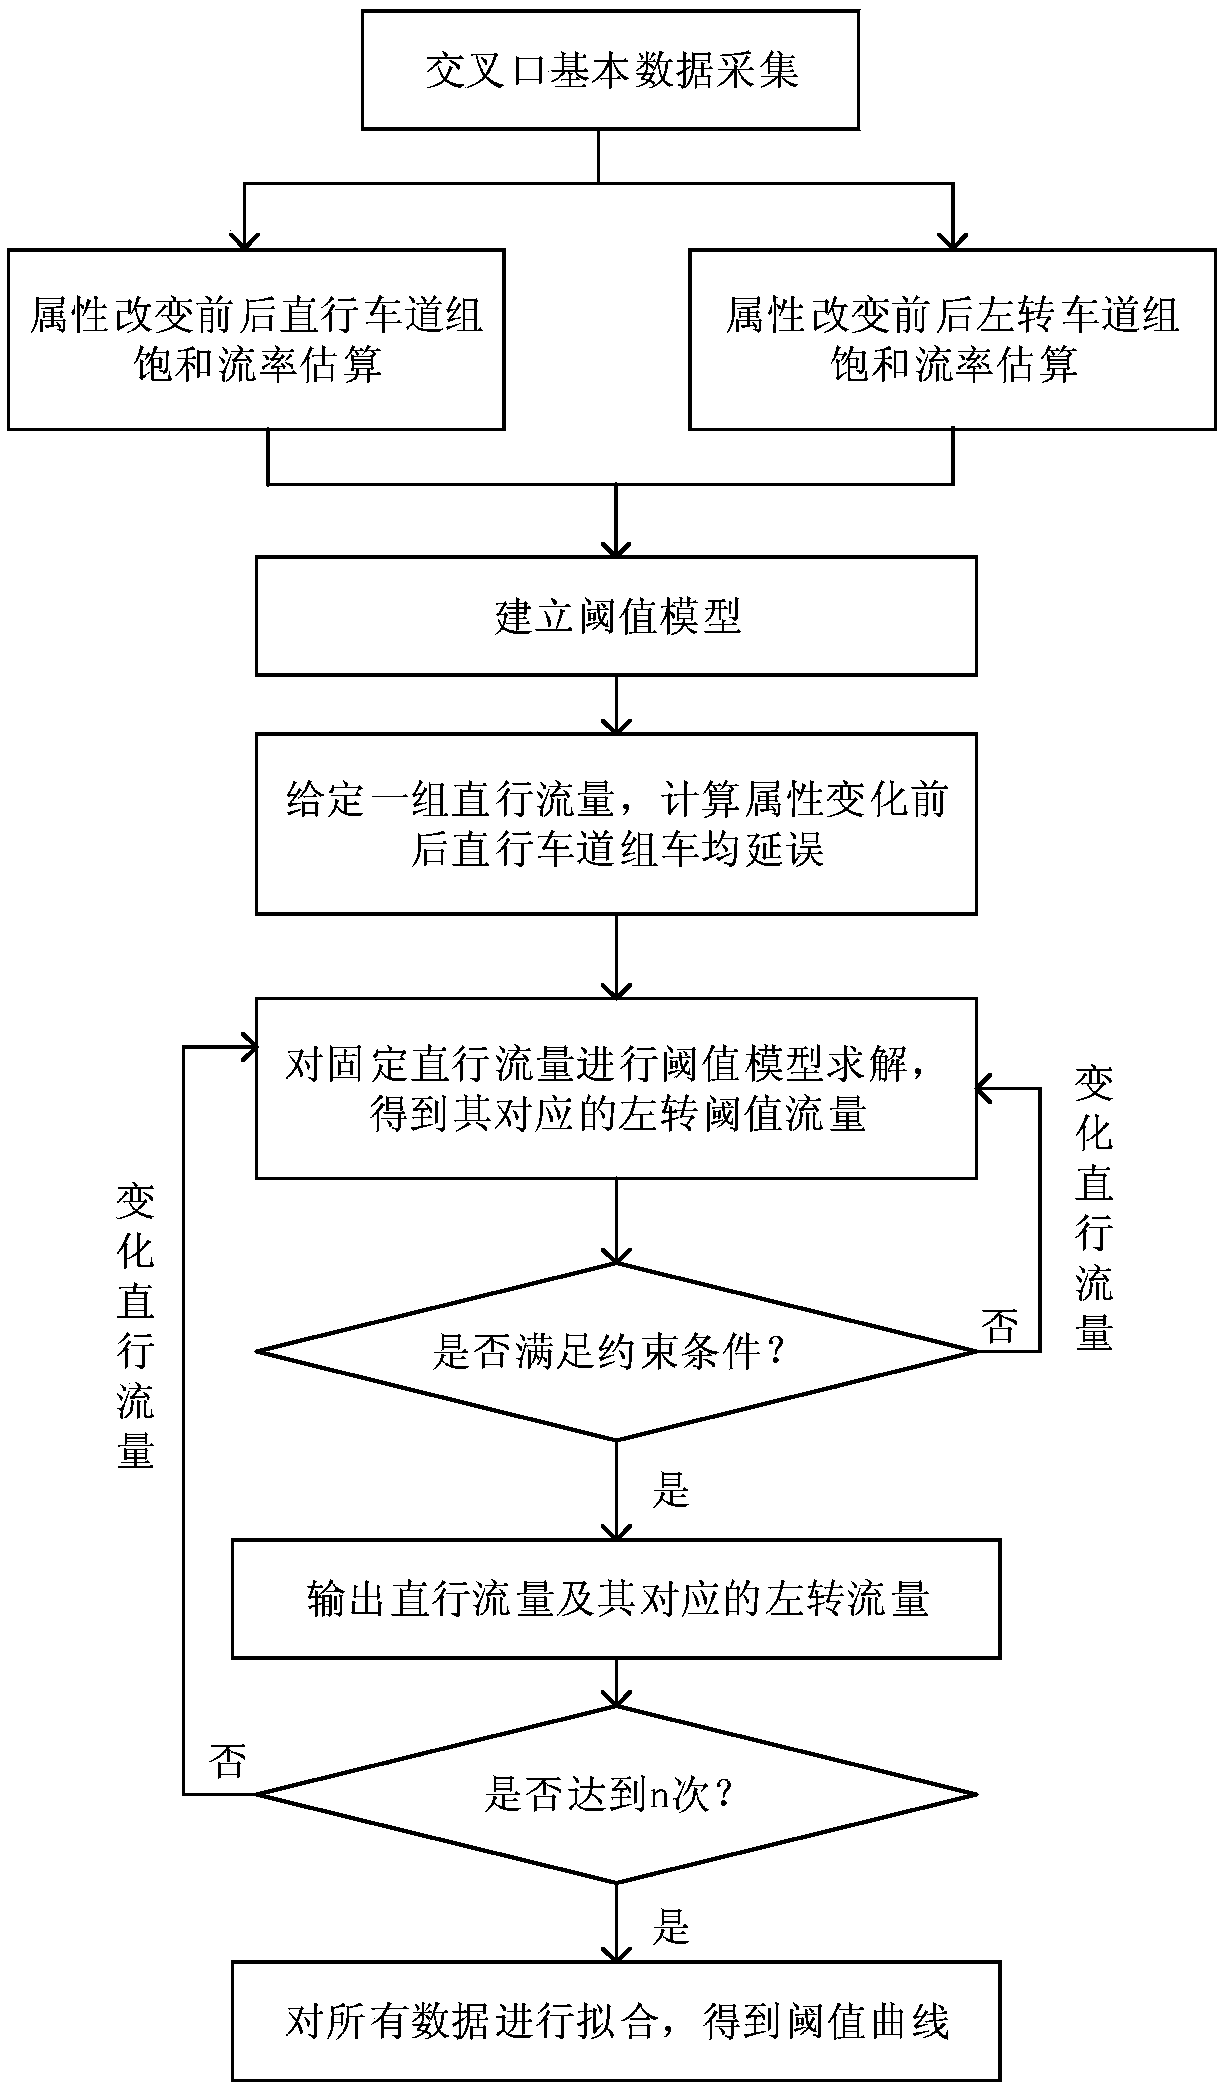 Signal control plane intersection variable guiding lane attribute dynamic adjustment threshold value setting method